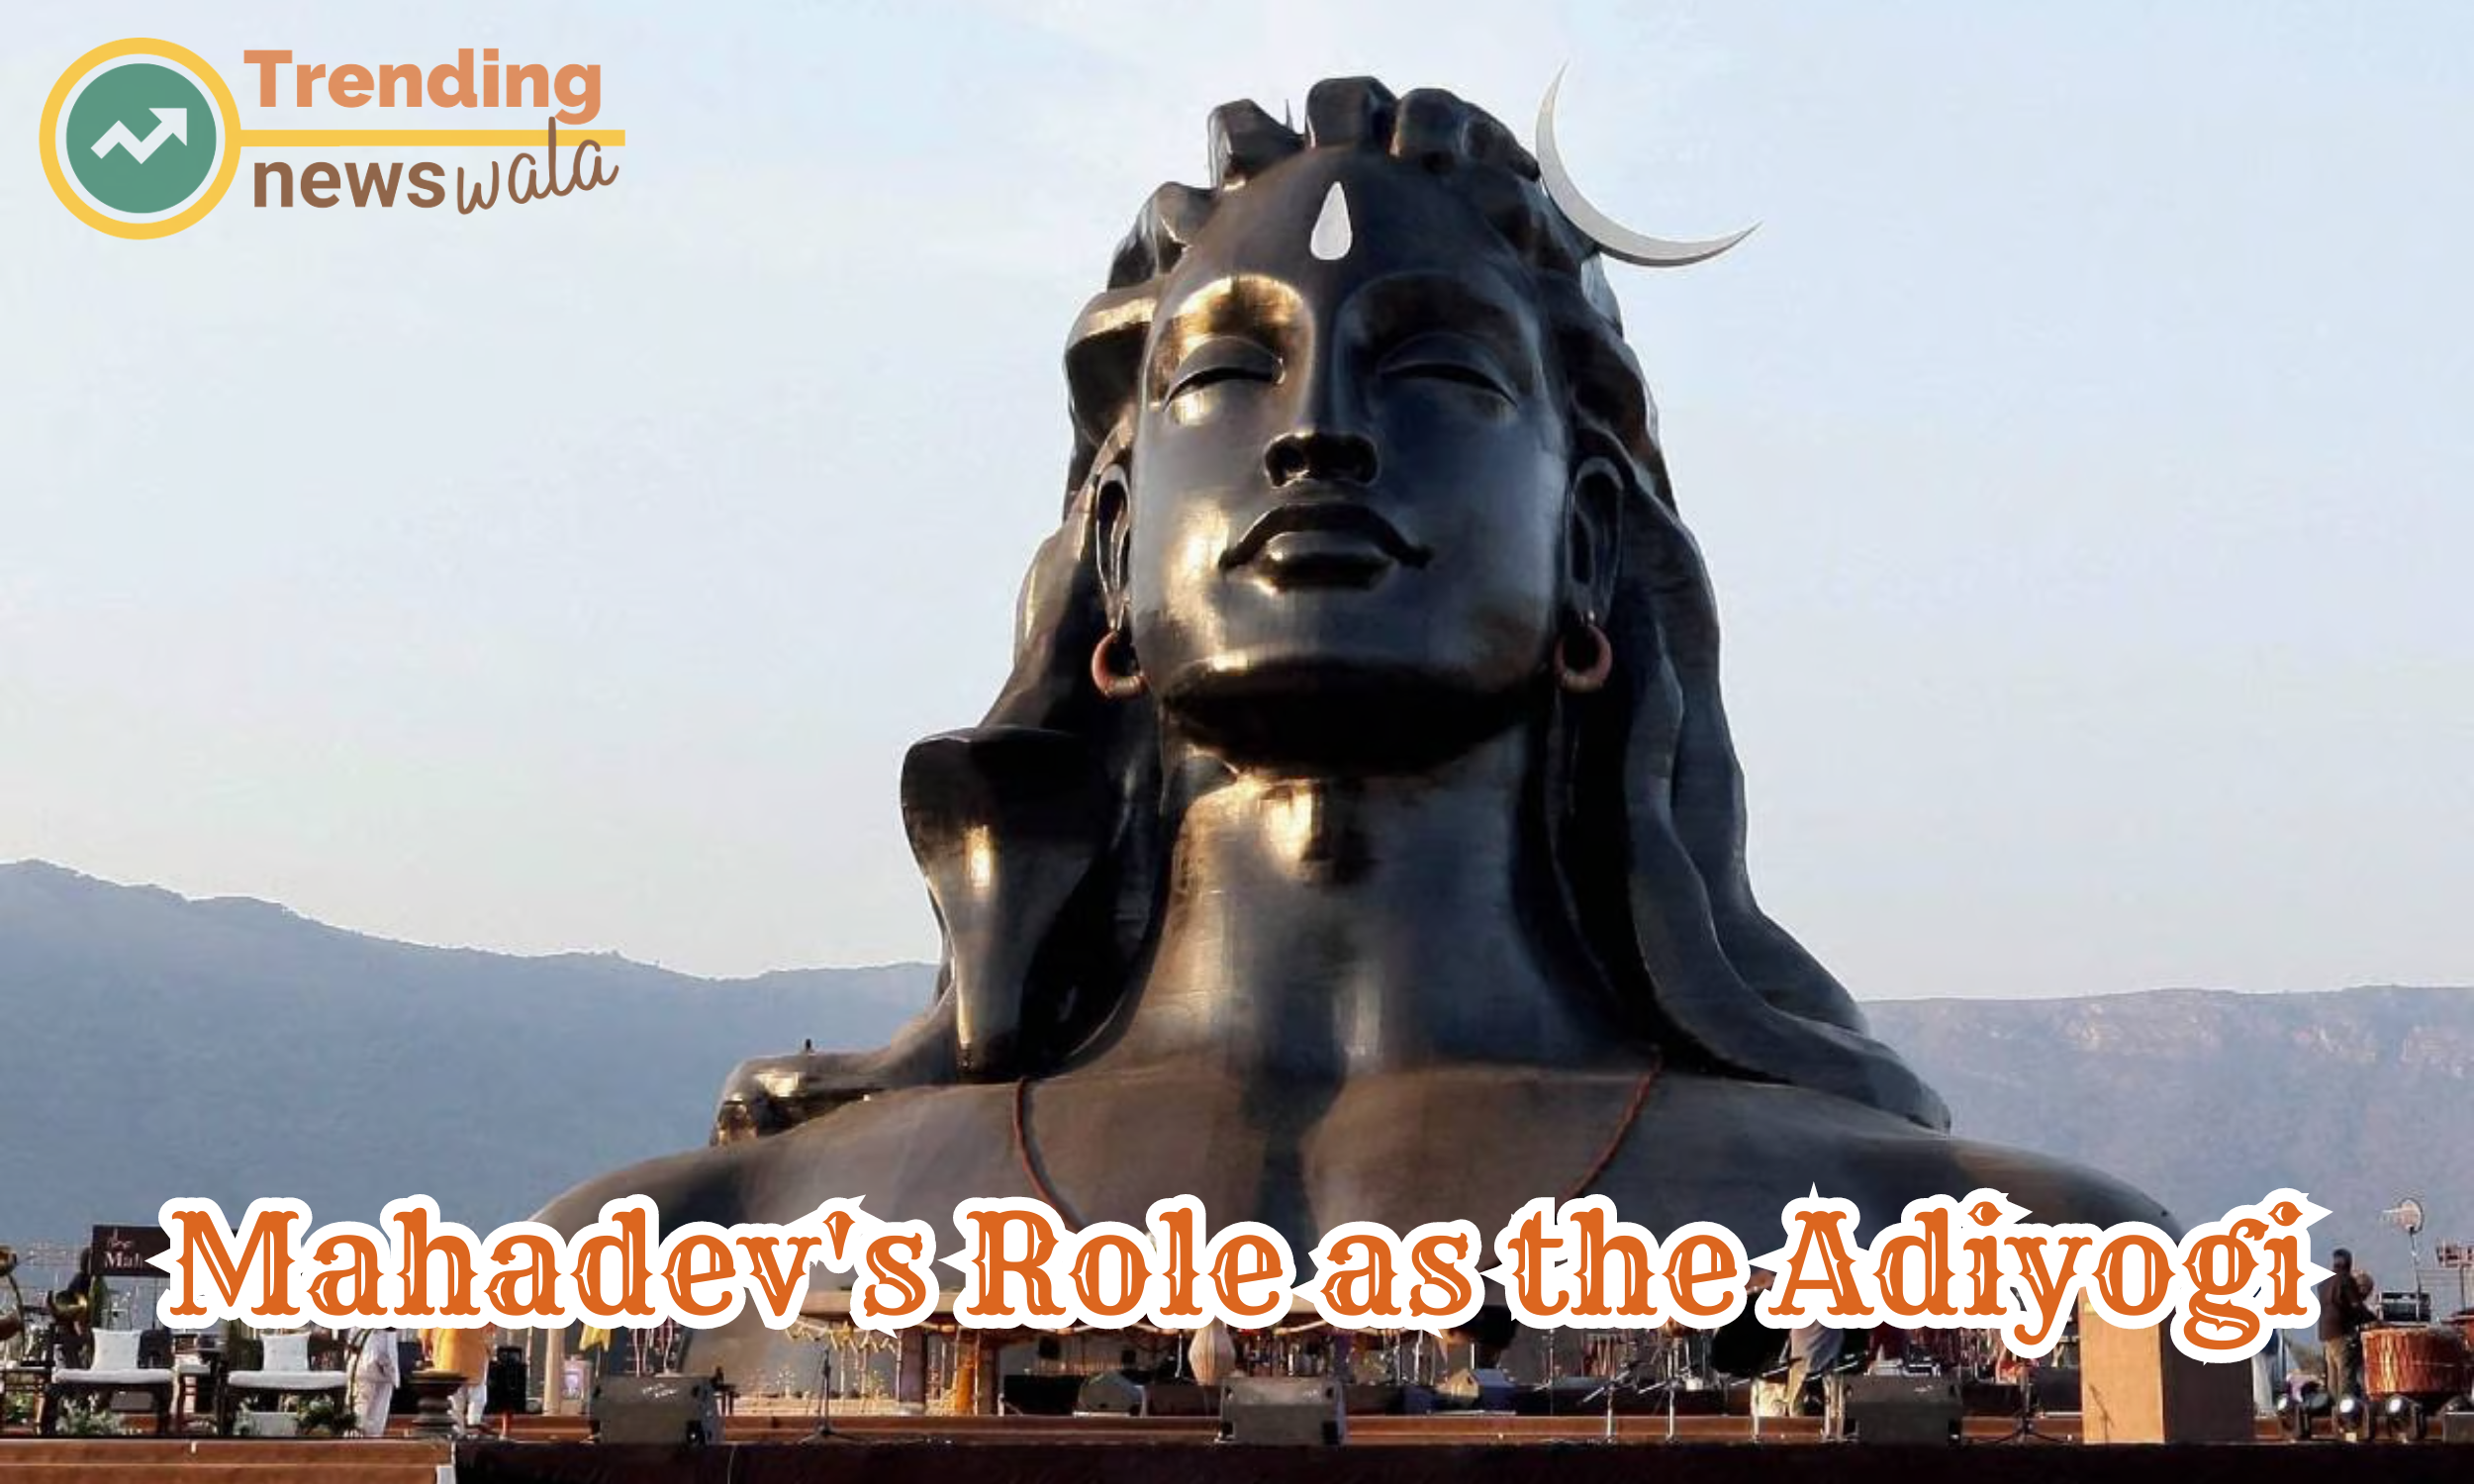 Lord Shiva's role as Adiyogi is deeply significant in Hinduism